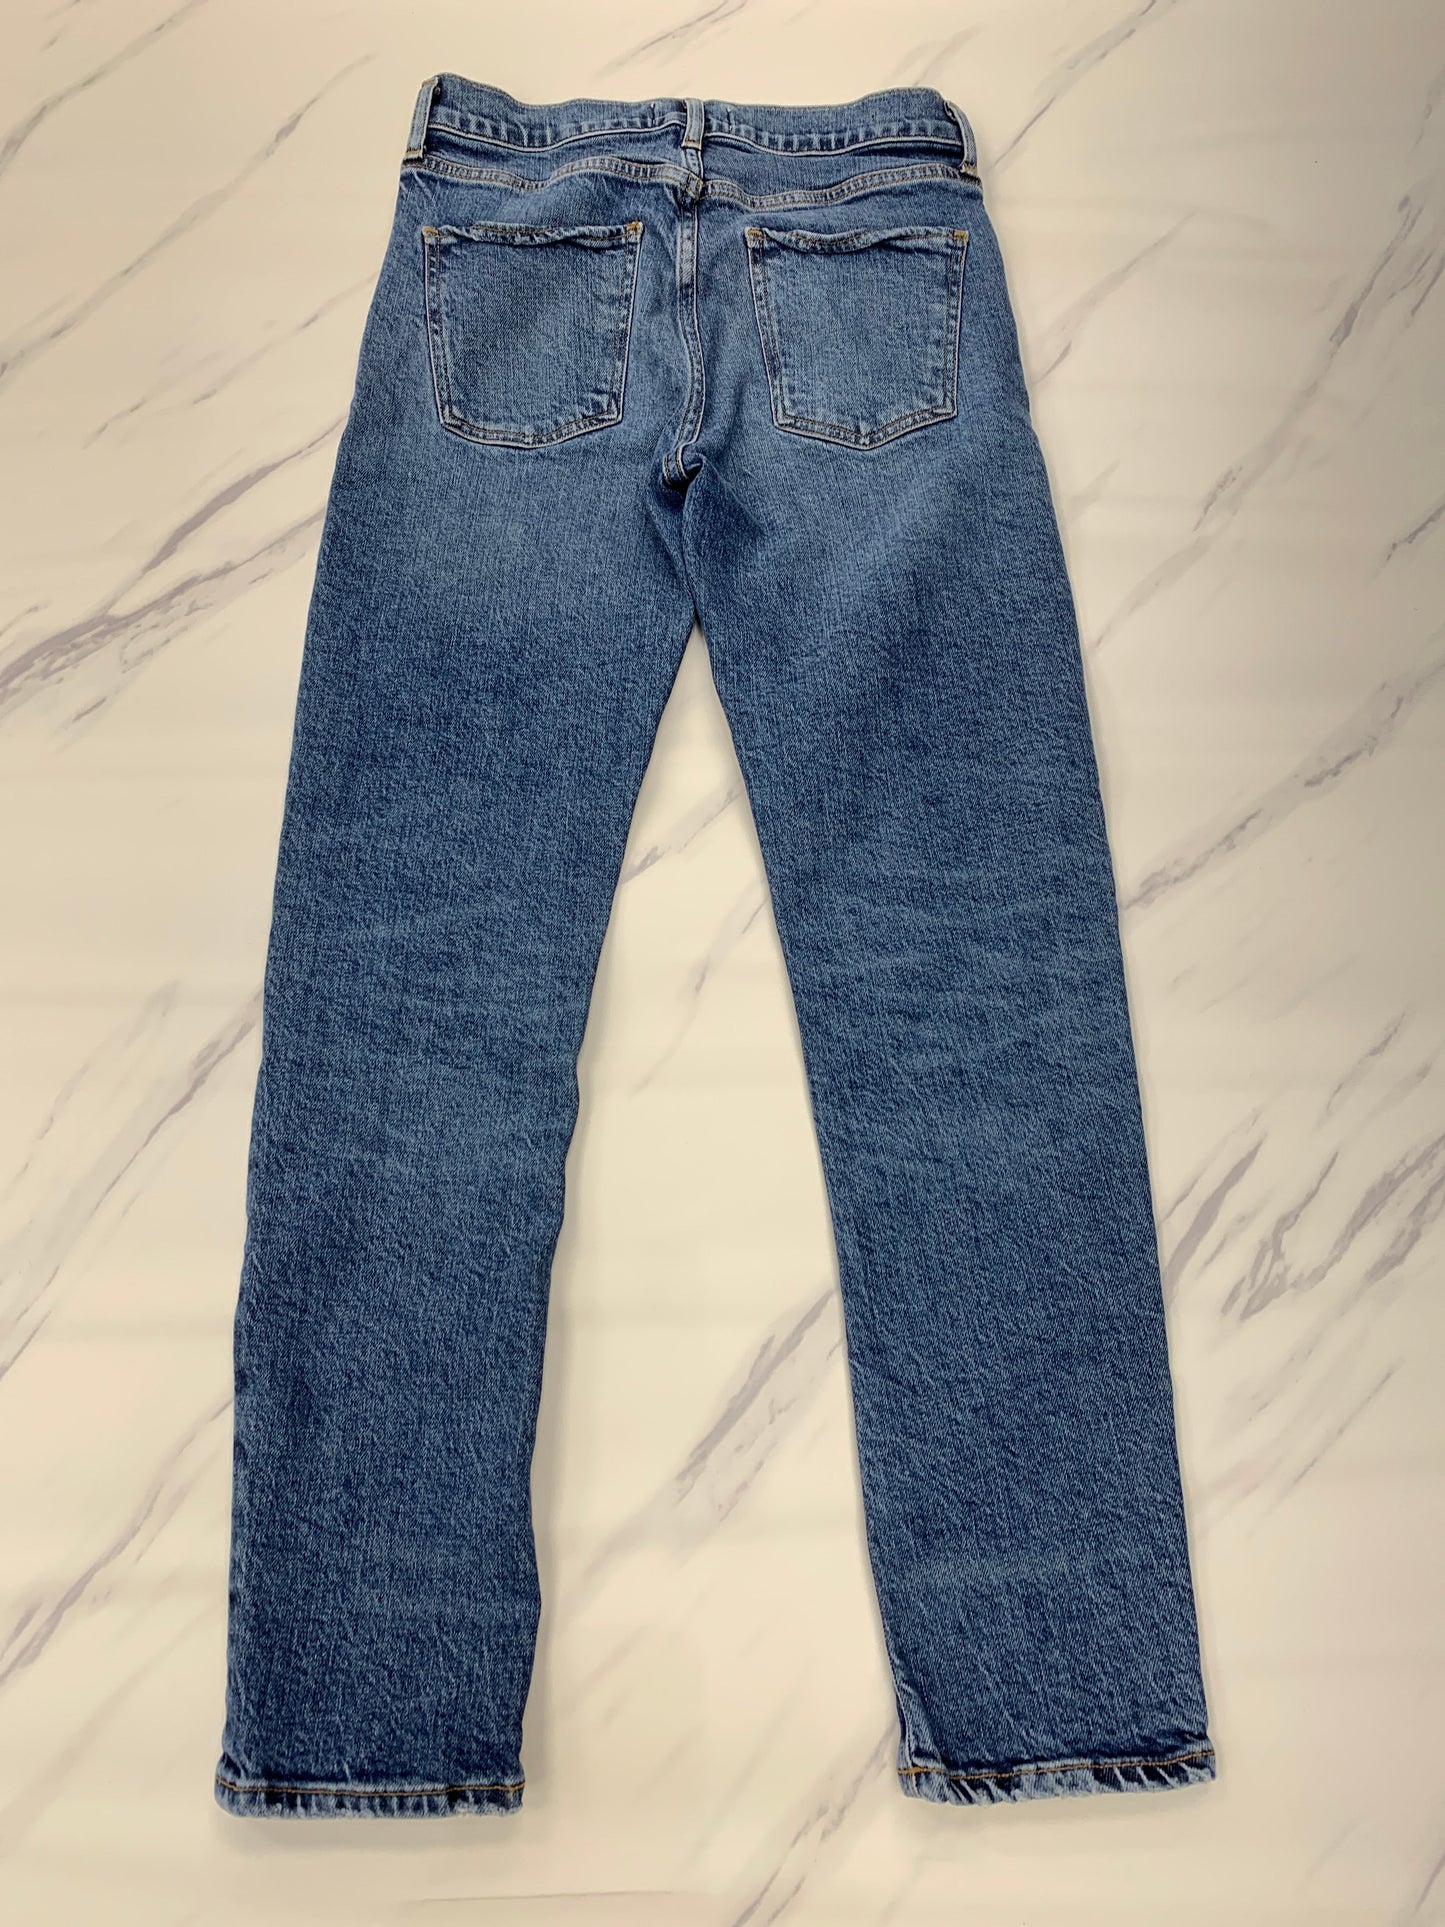 Jeans Skinny By Agolde  Size: 24